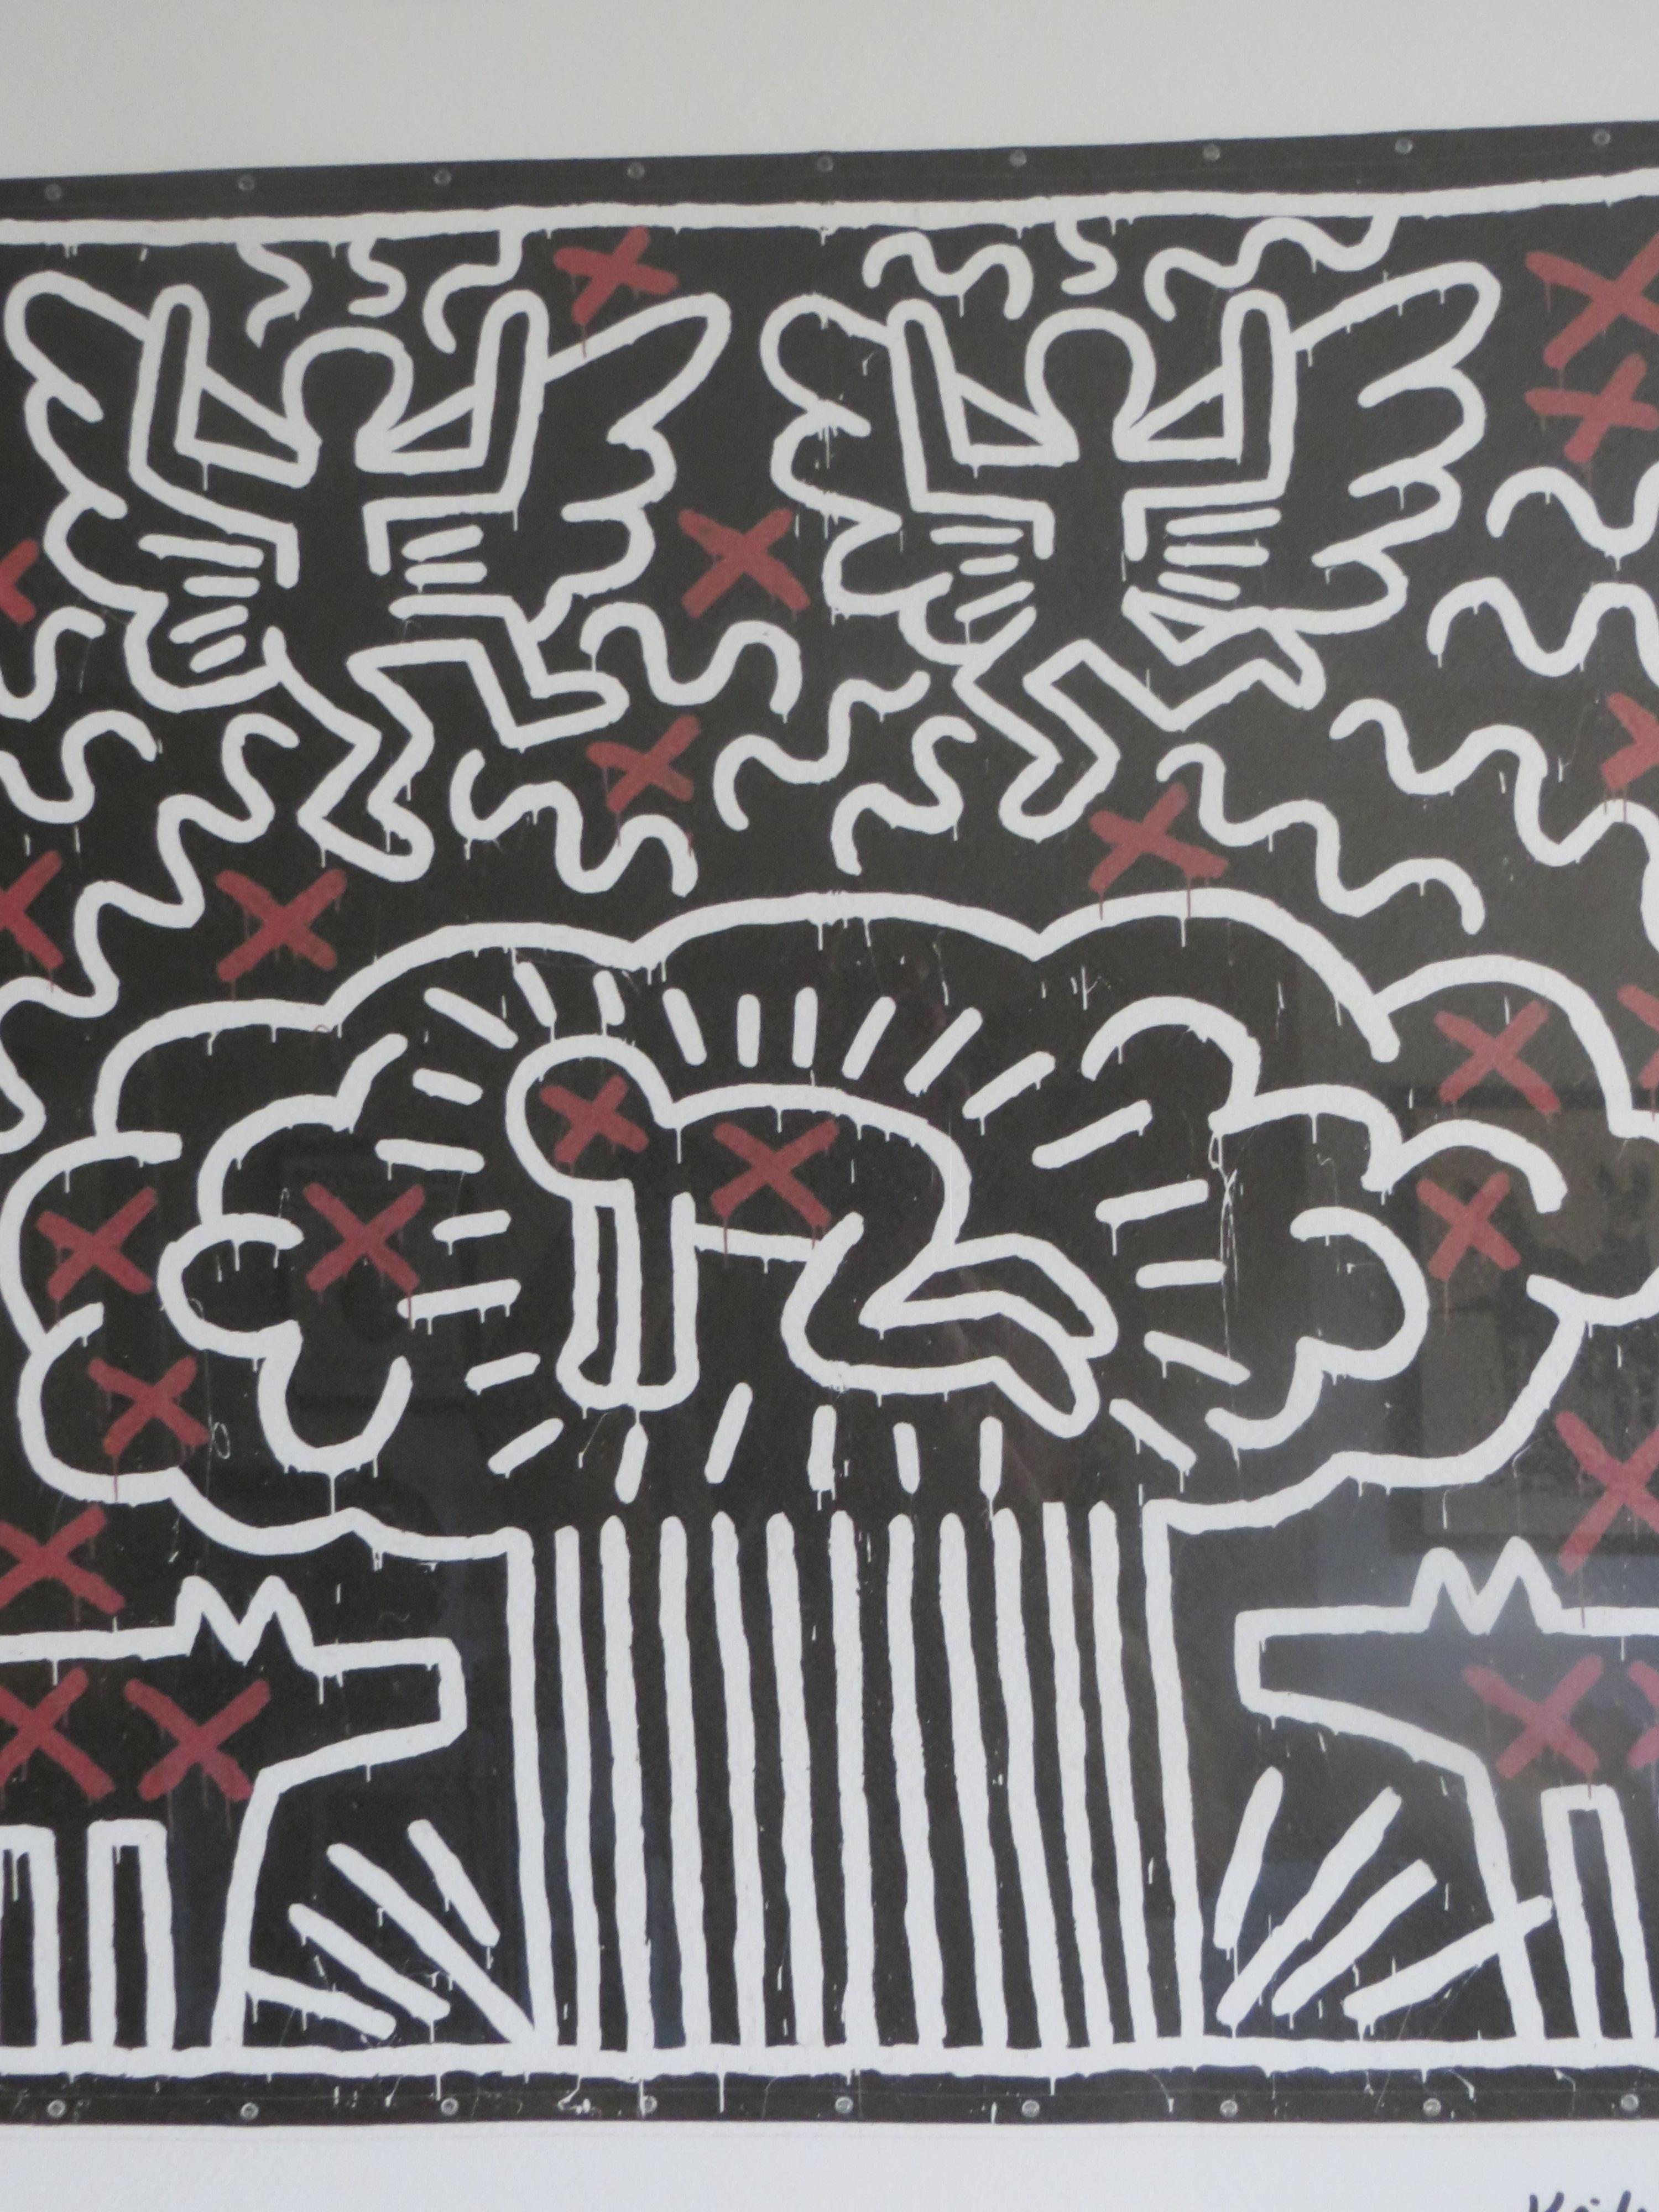   After Keith Haring, Lithograph, Numbered 95/150 - Pop Art Print by (after) Keith Haring